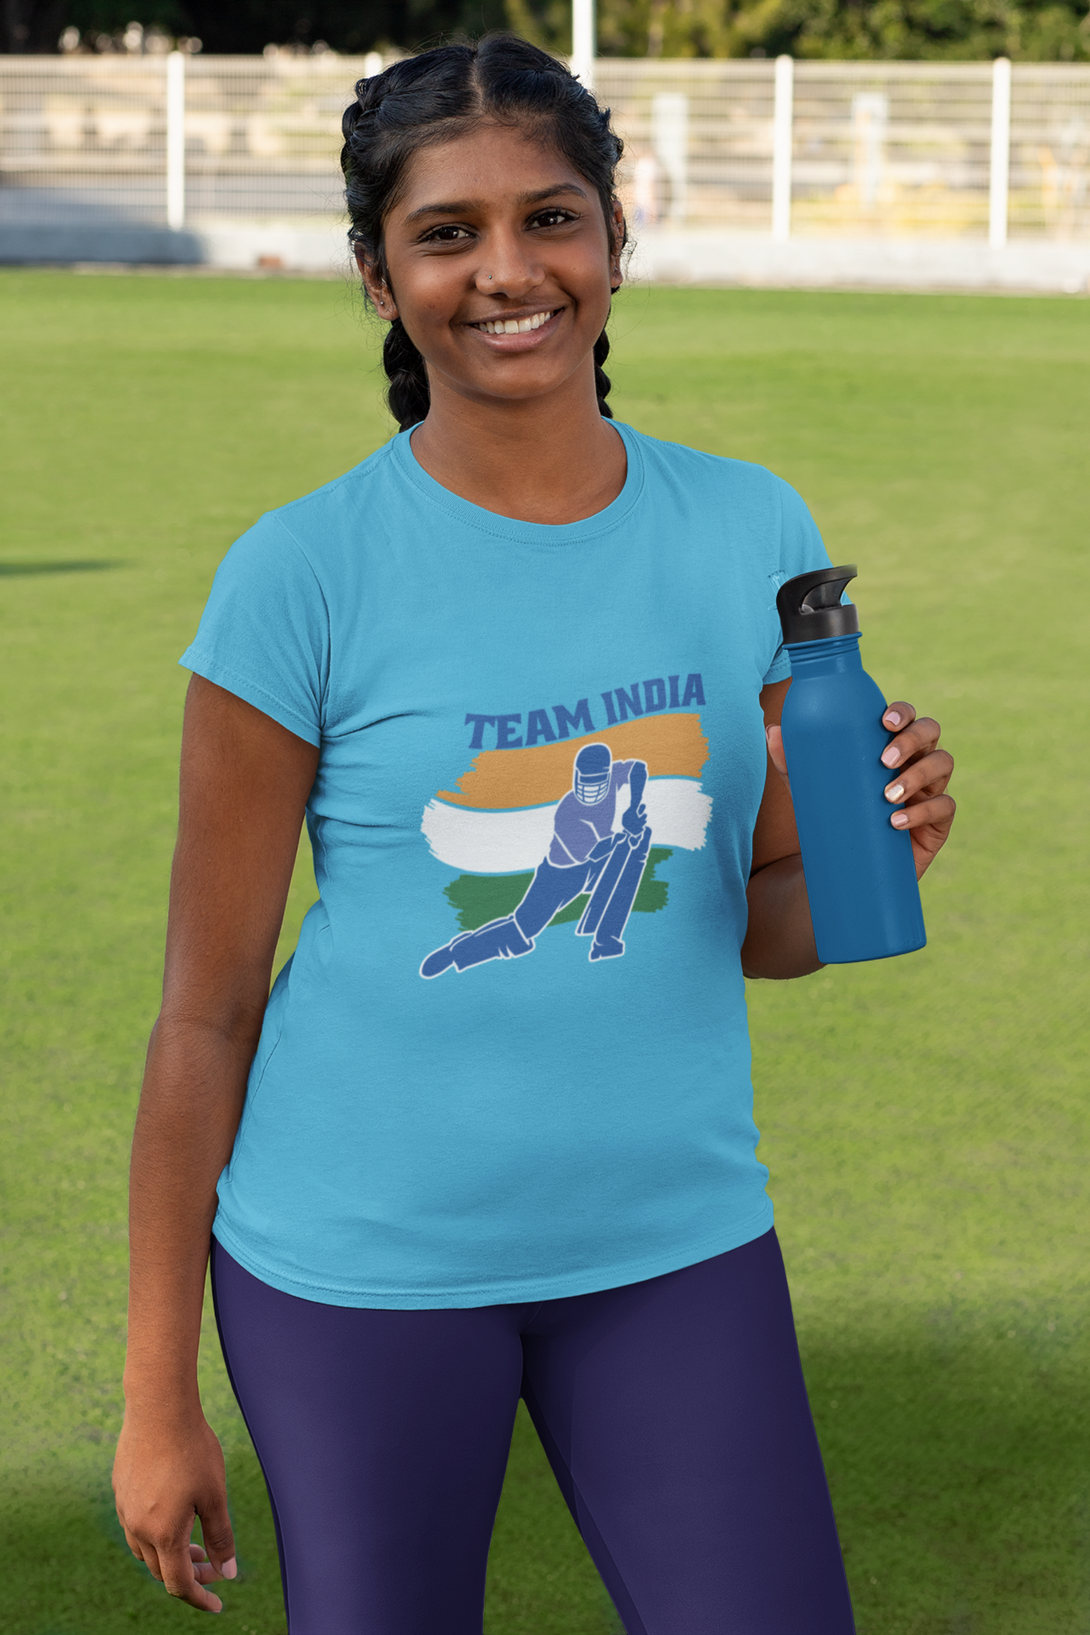 Team India Cricket Printed T-Shirt For Women - WowWaves - 5